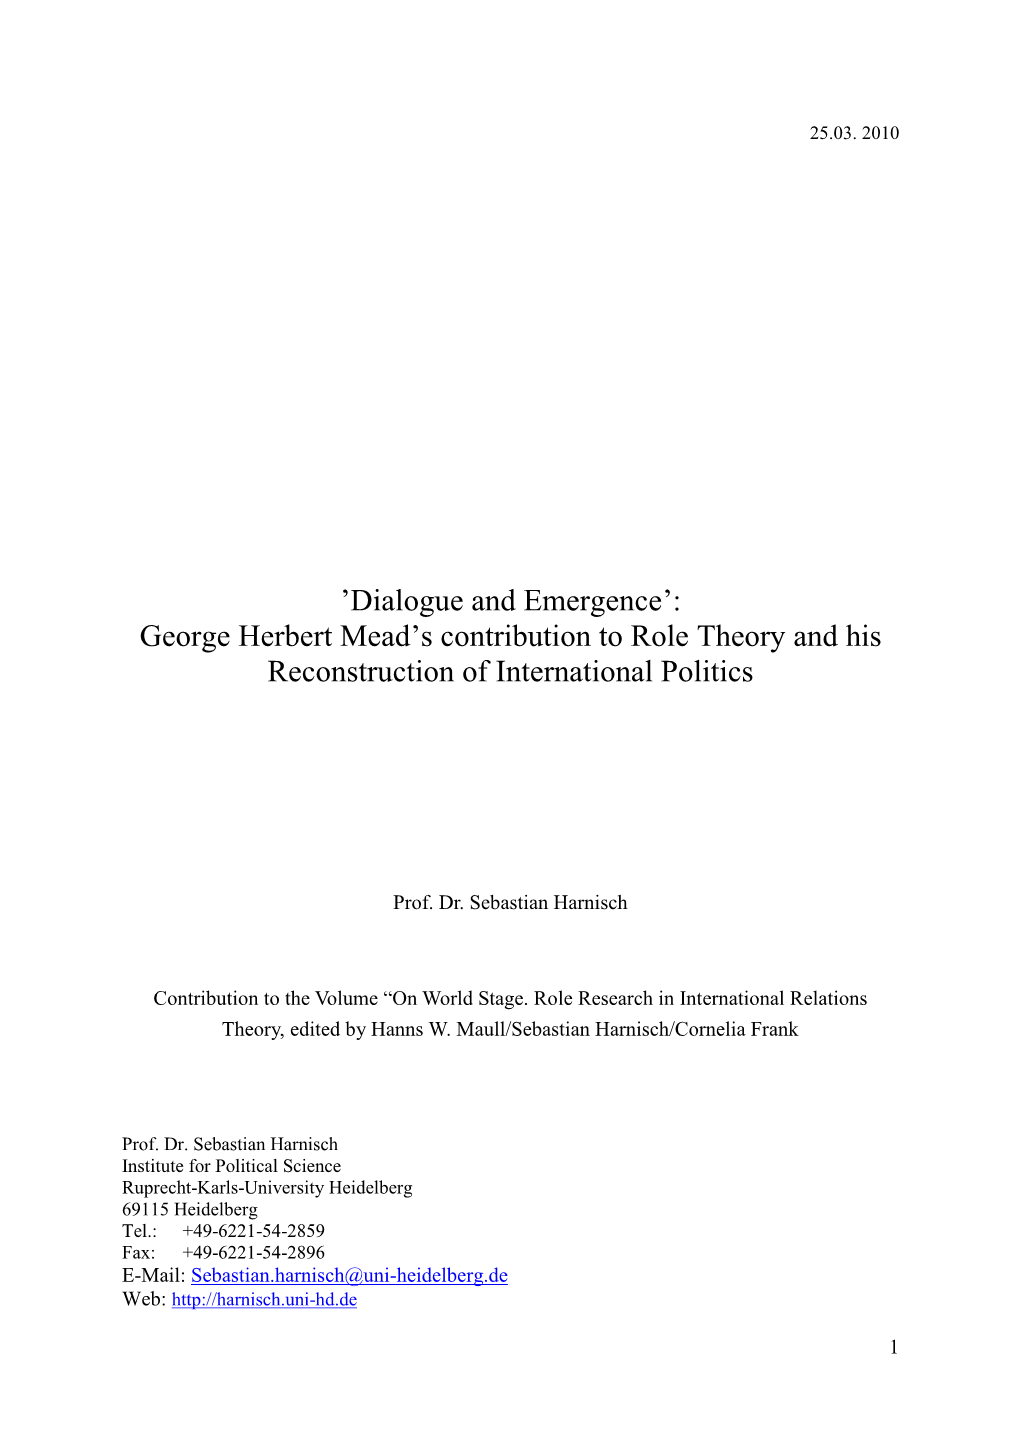 ‟Dialogue and Emergence‟: George Herbert Mead‟S Contribution to Role Theory and His Reconstruction of International Politics